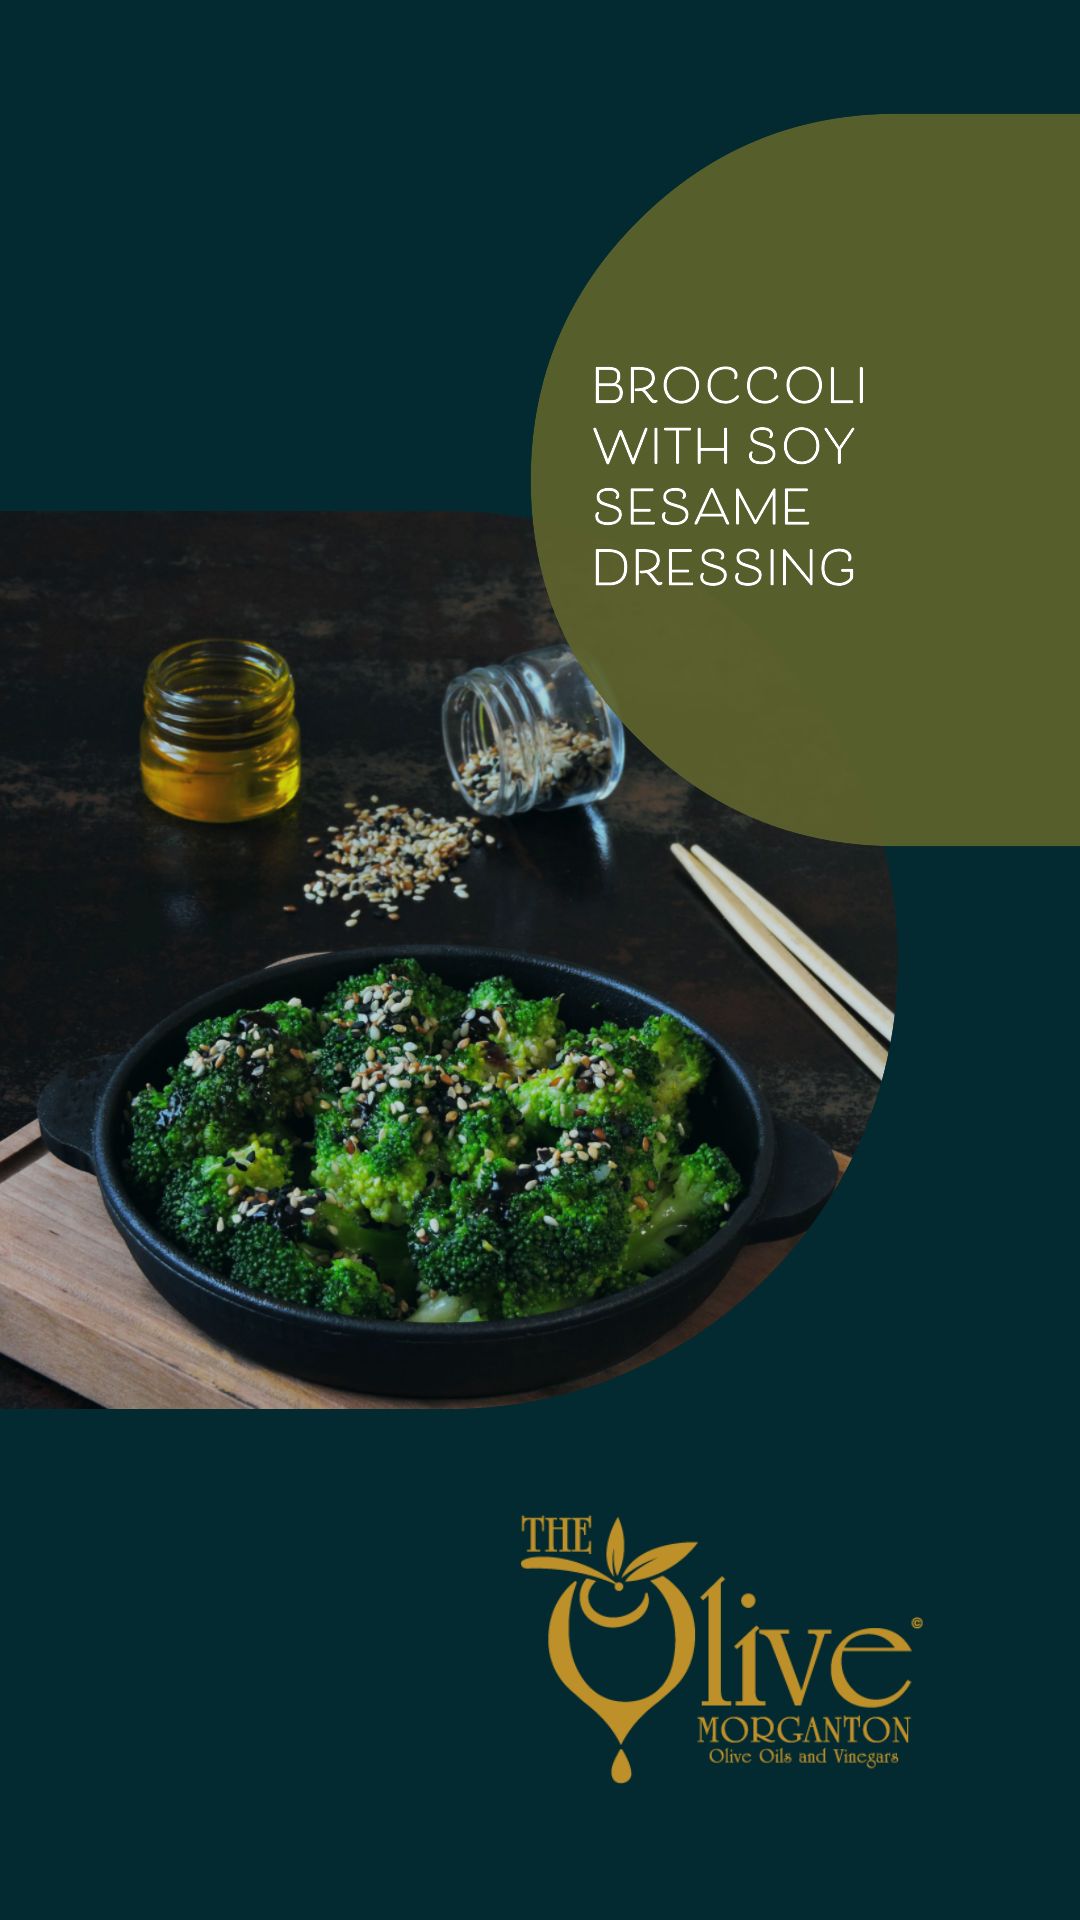 The Olive Broccoli with Soy Sesame Dressing